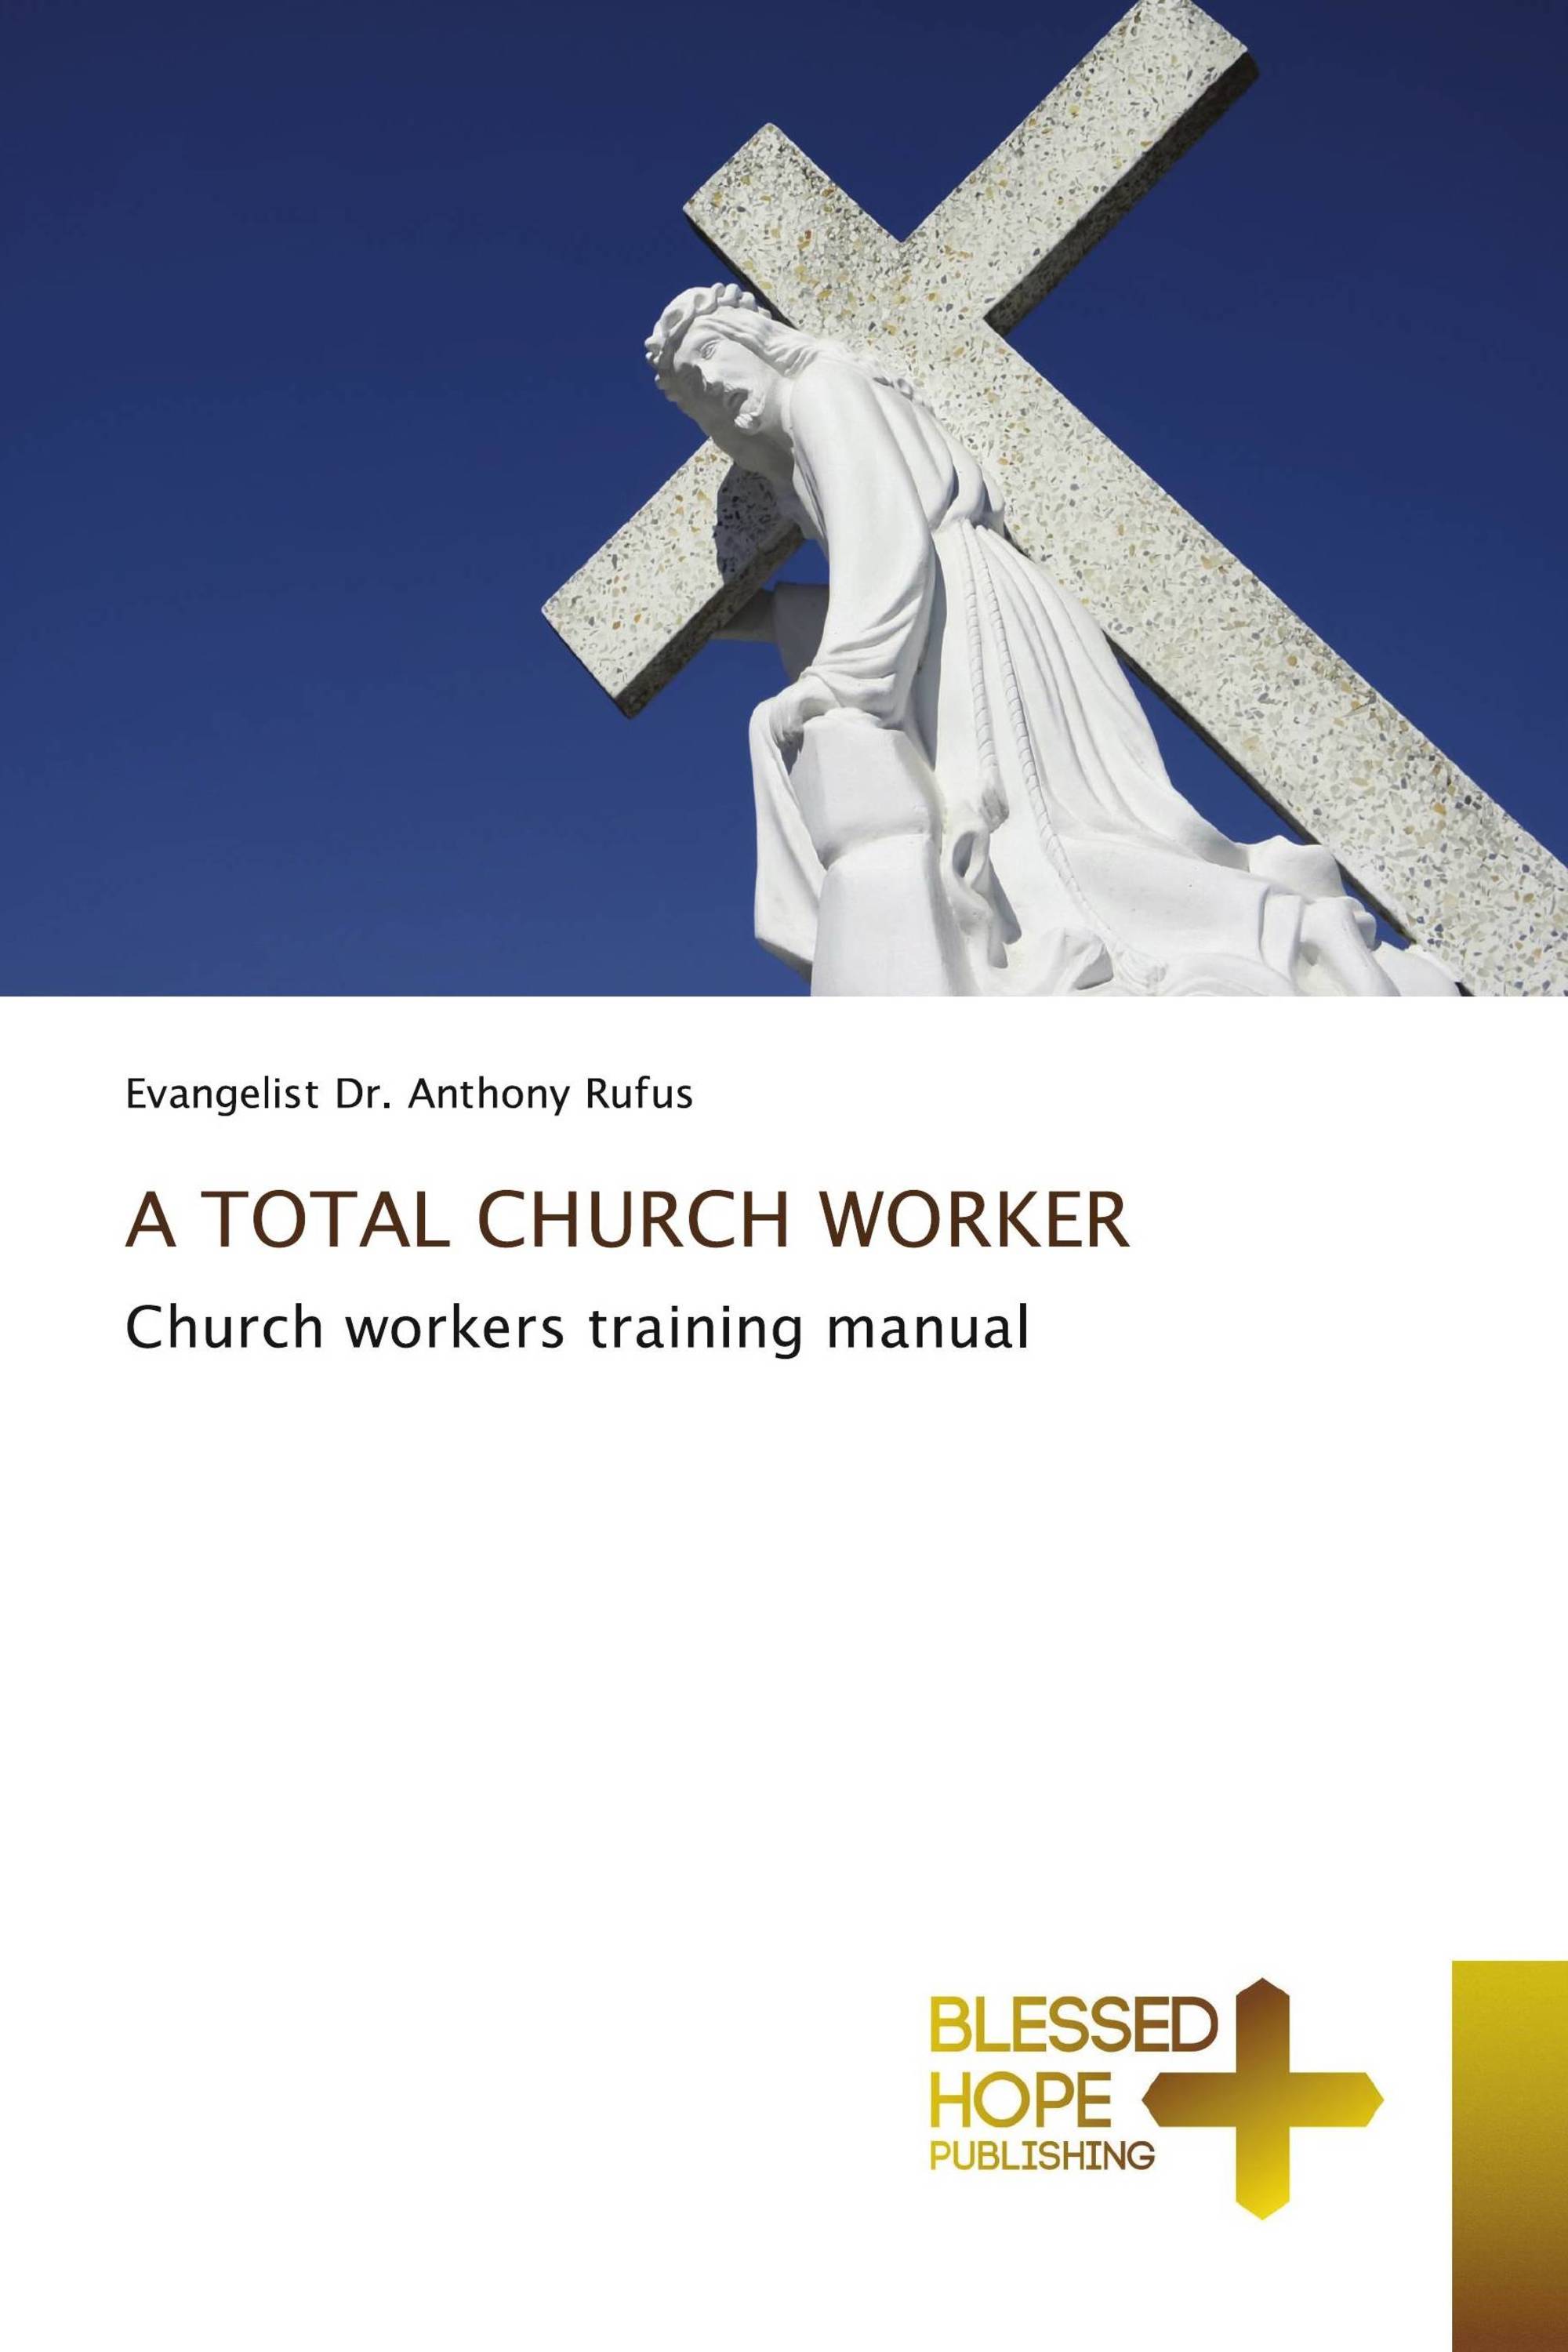 A TOTAL CHURCH WORKER